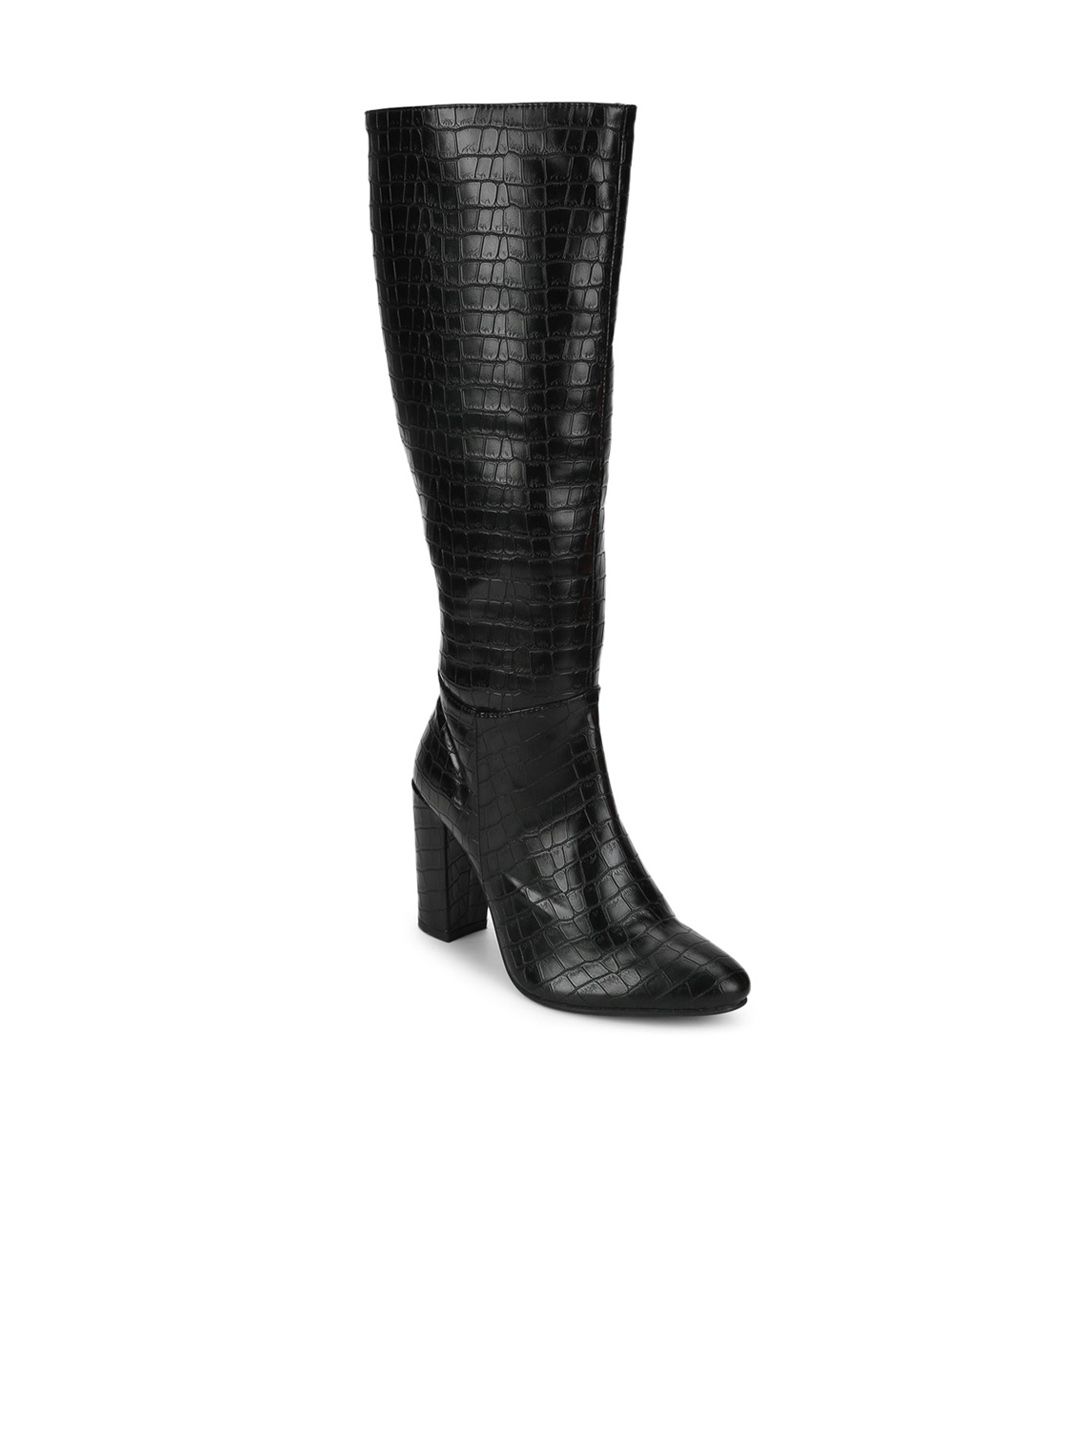 Truffle Collection Women Black Textured PU High-Top Block Heeled Boots Price in India